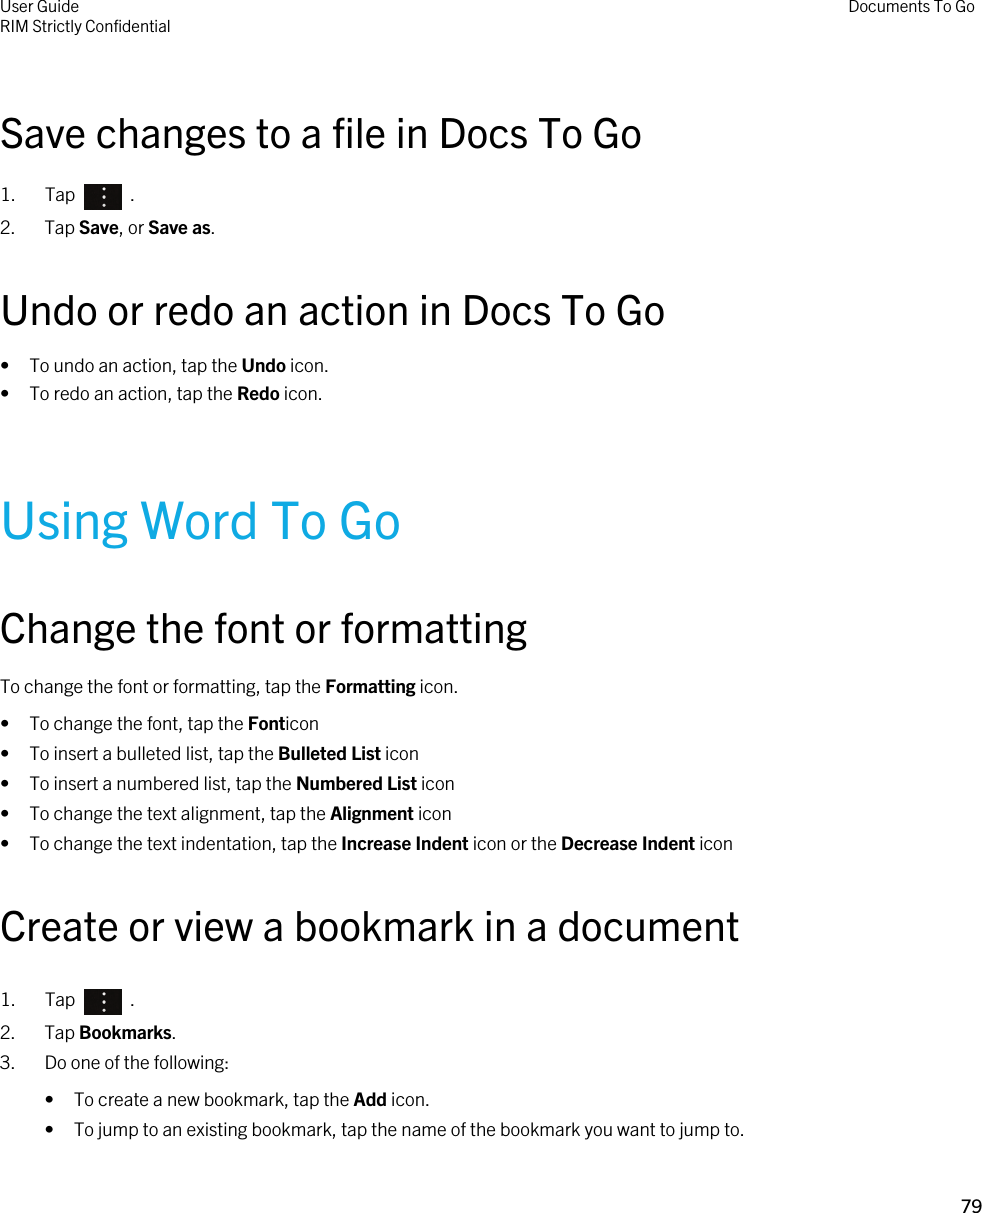 Save changes to a file in Docs To Go1.  Tap    .2. Tap Save, or Save as.Undo or redo an action in Docs To Go• To undo an action, tap the Undo icon.• To redo an action, tap the Redo icon.Using Word To GoChange the font or formattingTo change the font or formatting, tap the Formatting icon.• To change the font, tap the Fonticon• To insert a bulleted list, tap the Bulleted List icon• To insert a numbered list, tap the Numbered List icon• To change the text alignment, tap the Alignment icon• To change the text indentation, tap the Increase Indent icon or the Decrease Indent iconCreate or view a bookmark in a document1.  Tap    .2. Tap Bookmarks.3. Do one of the following:• To create a new bookmark, tap the Add icon.• To jump to an existing bookmark, tap the name of the bookmark you want to jump to.User GuideRIM Strictly Confidential Documents To Go79 